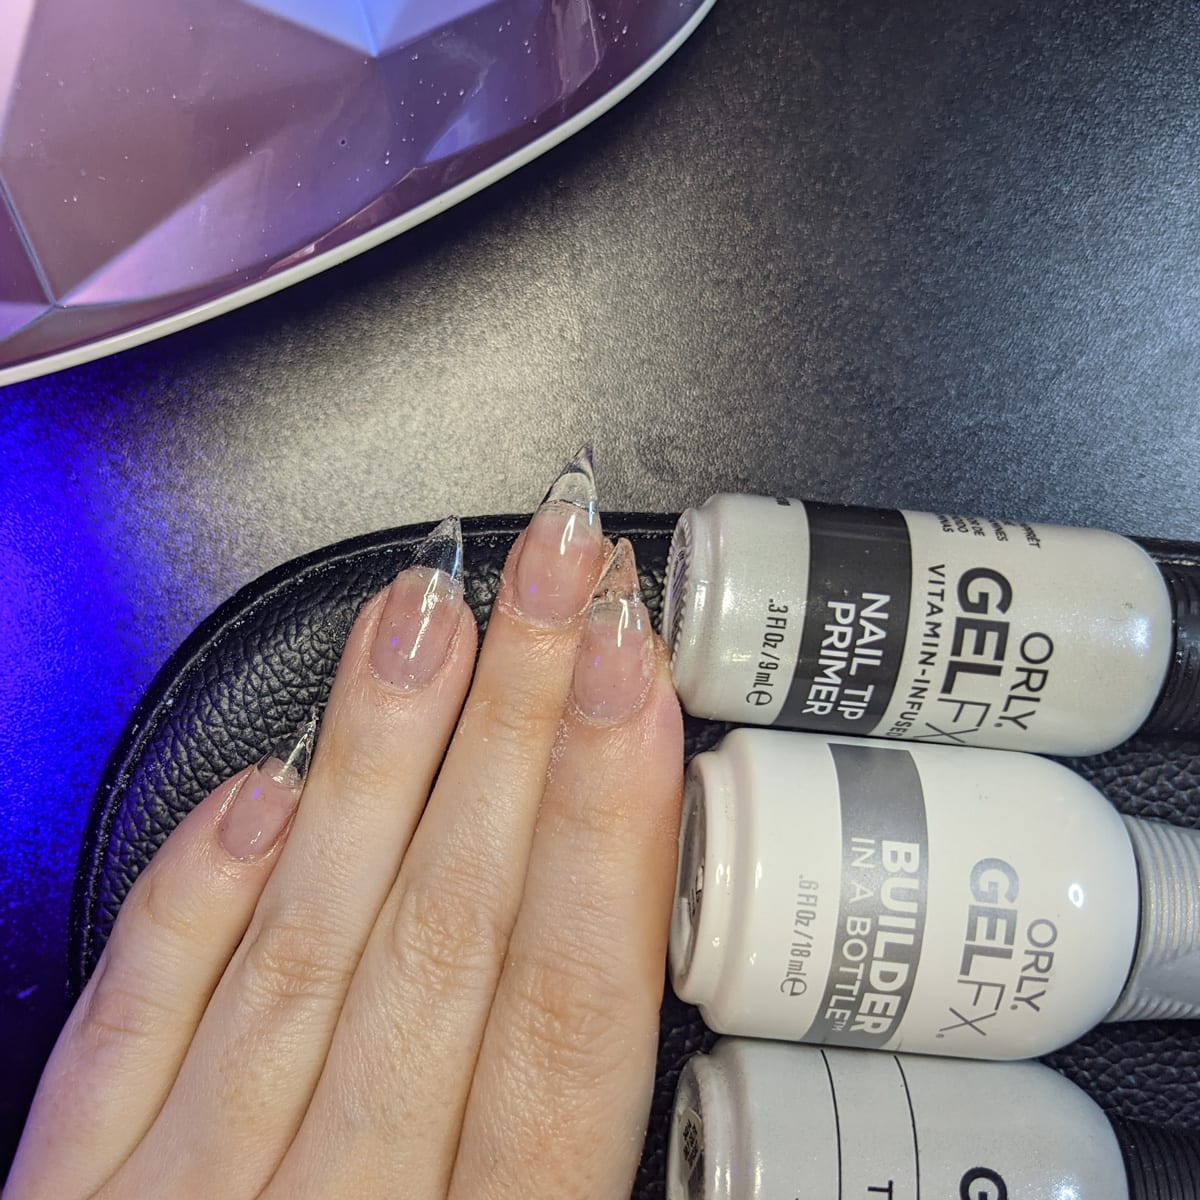 How to DIY Gel Nails at Home